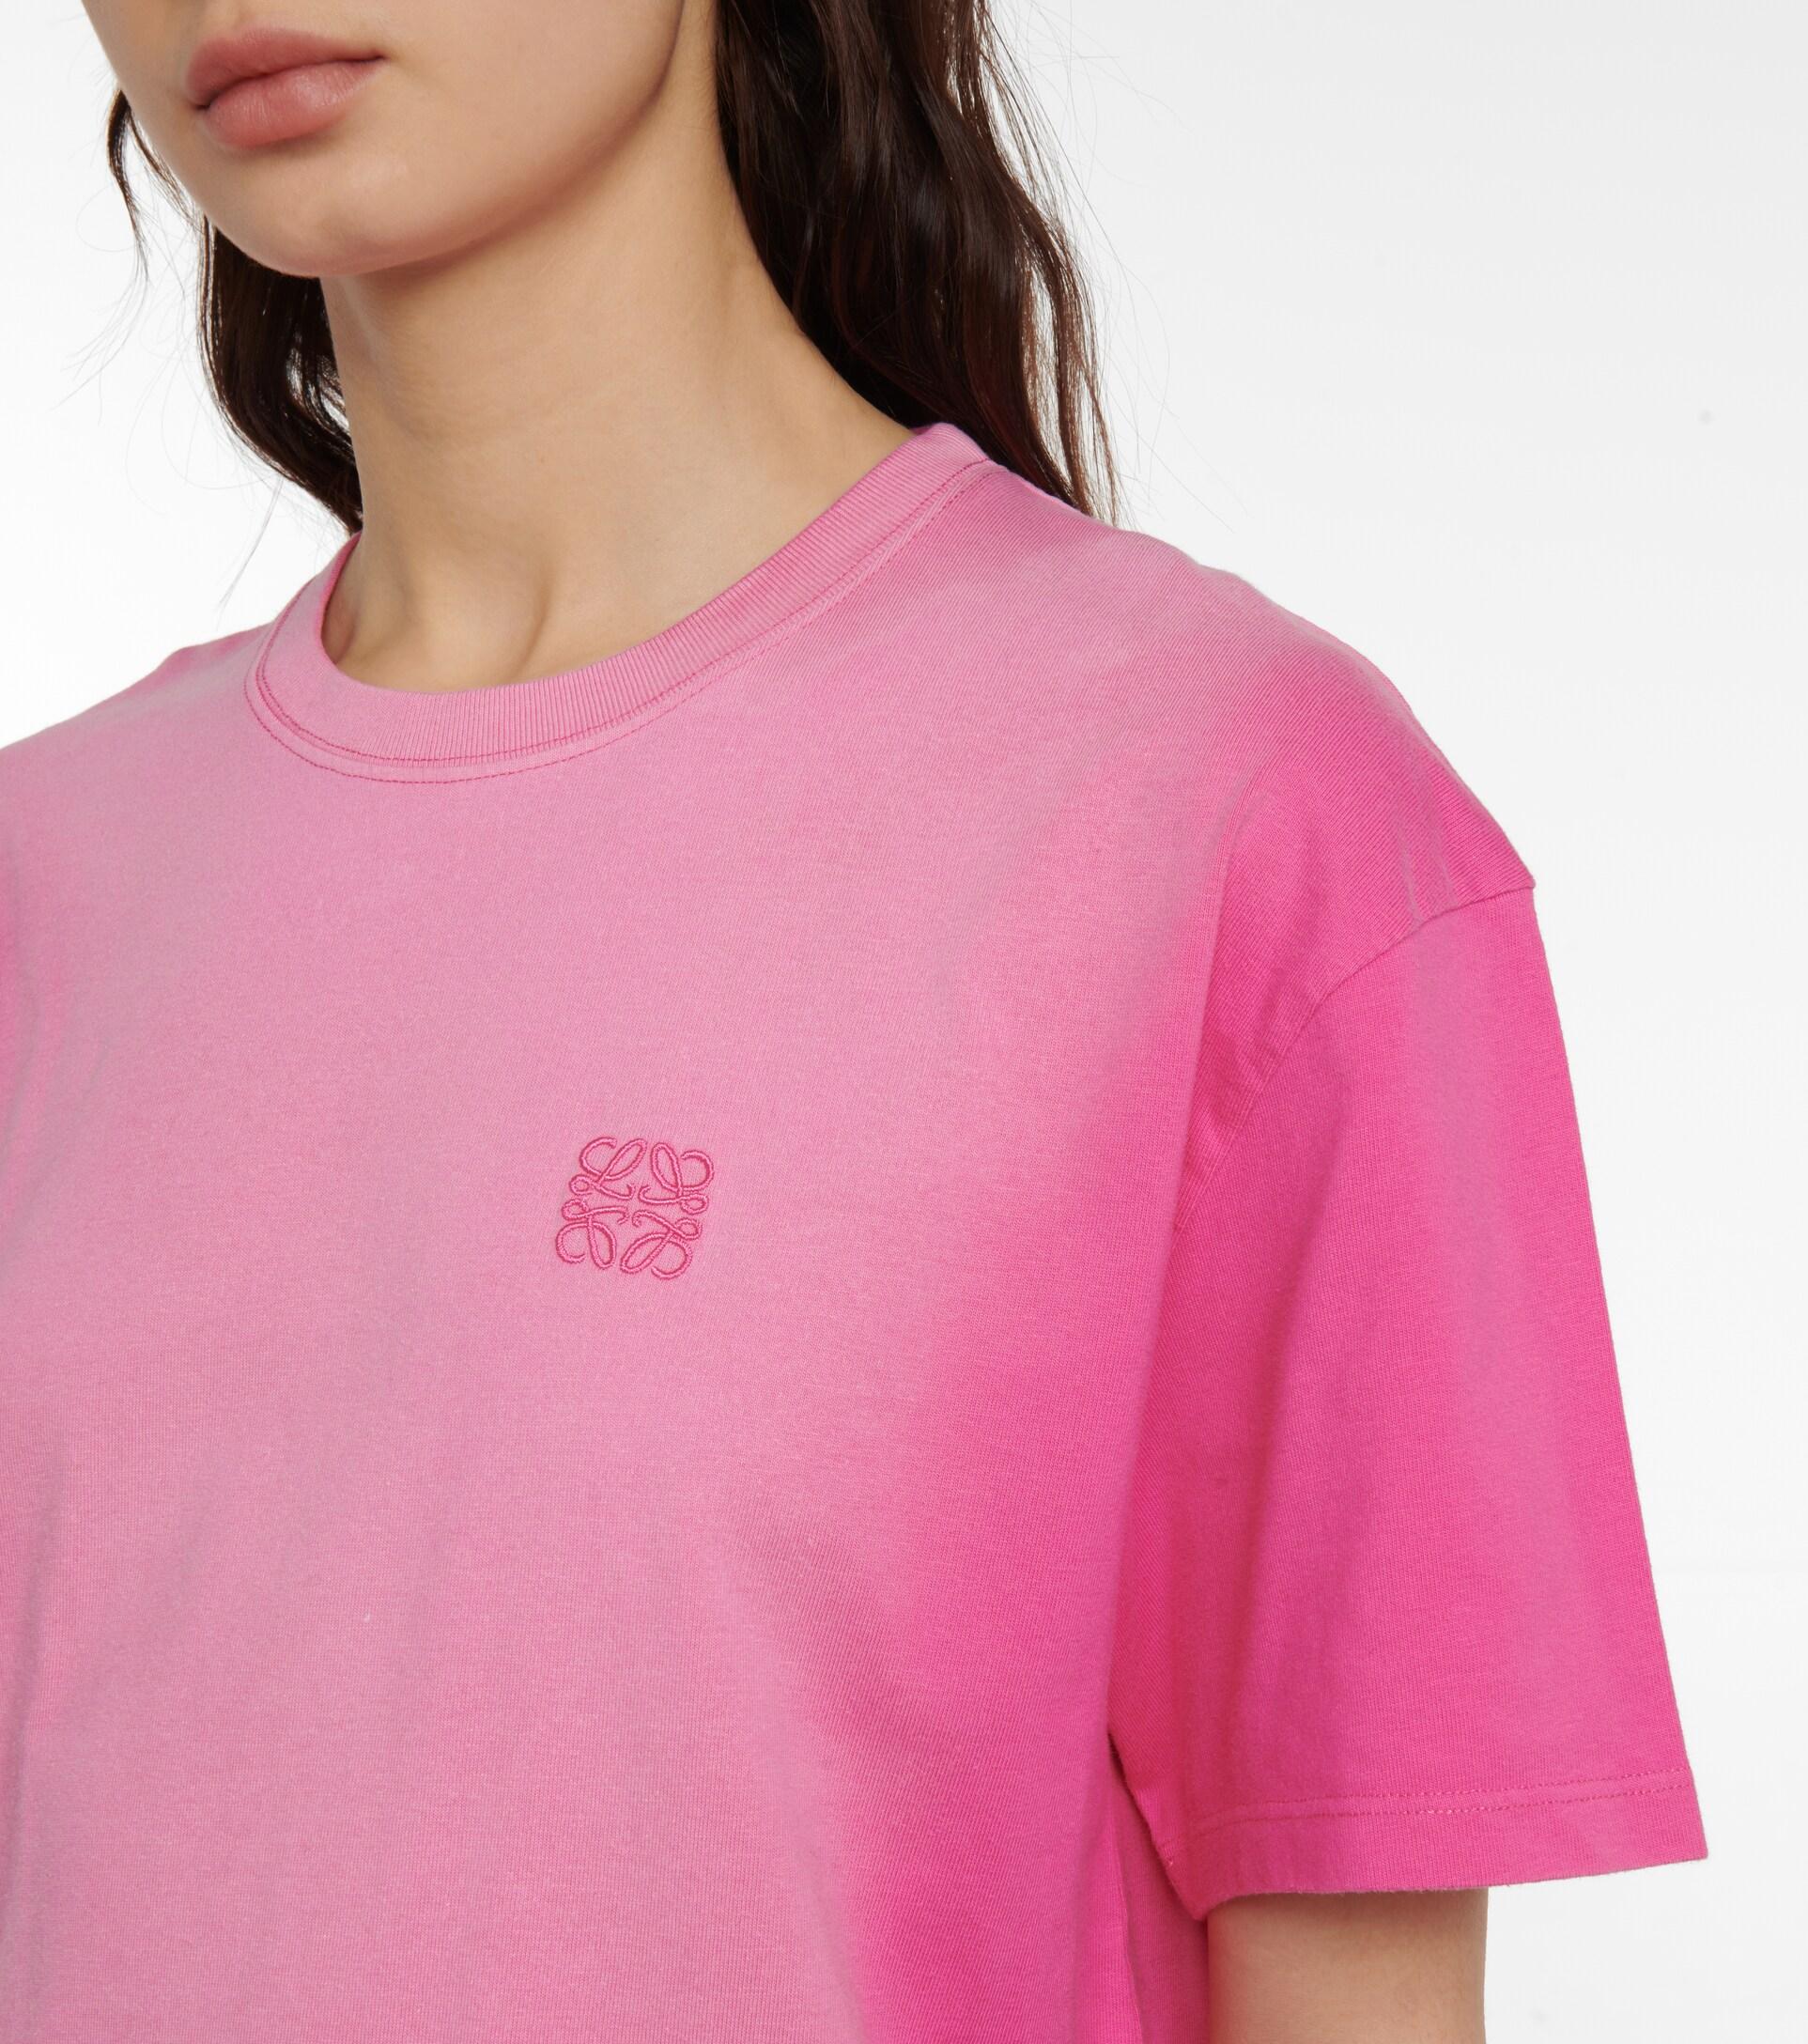 Loewe Anagram Embroidered Jersey T-shirt in Pink | Lyst